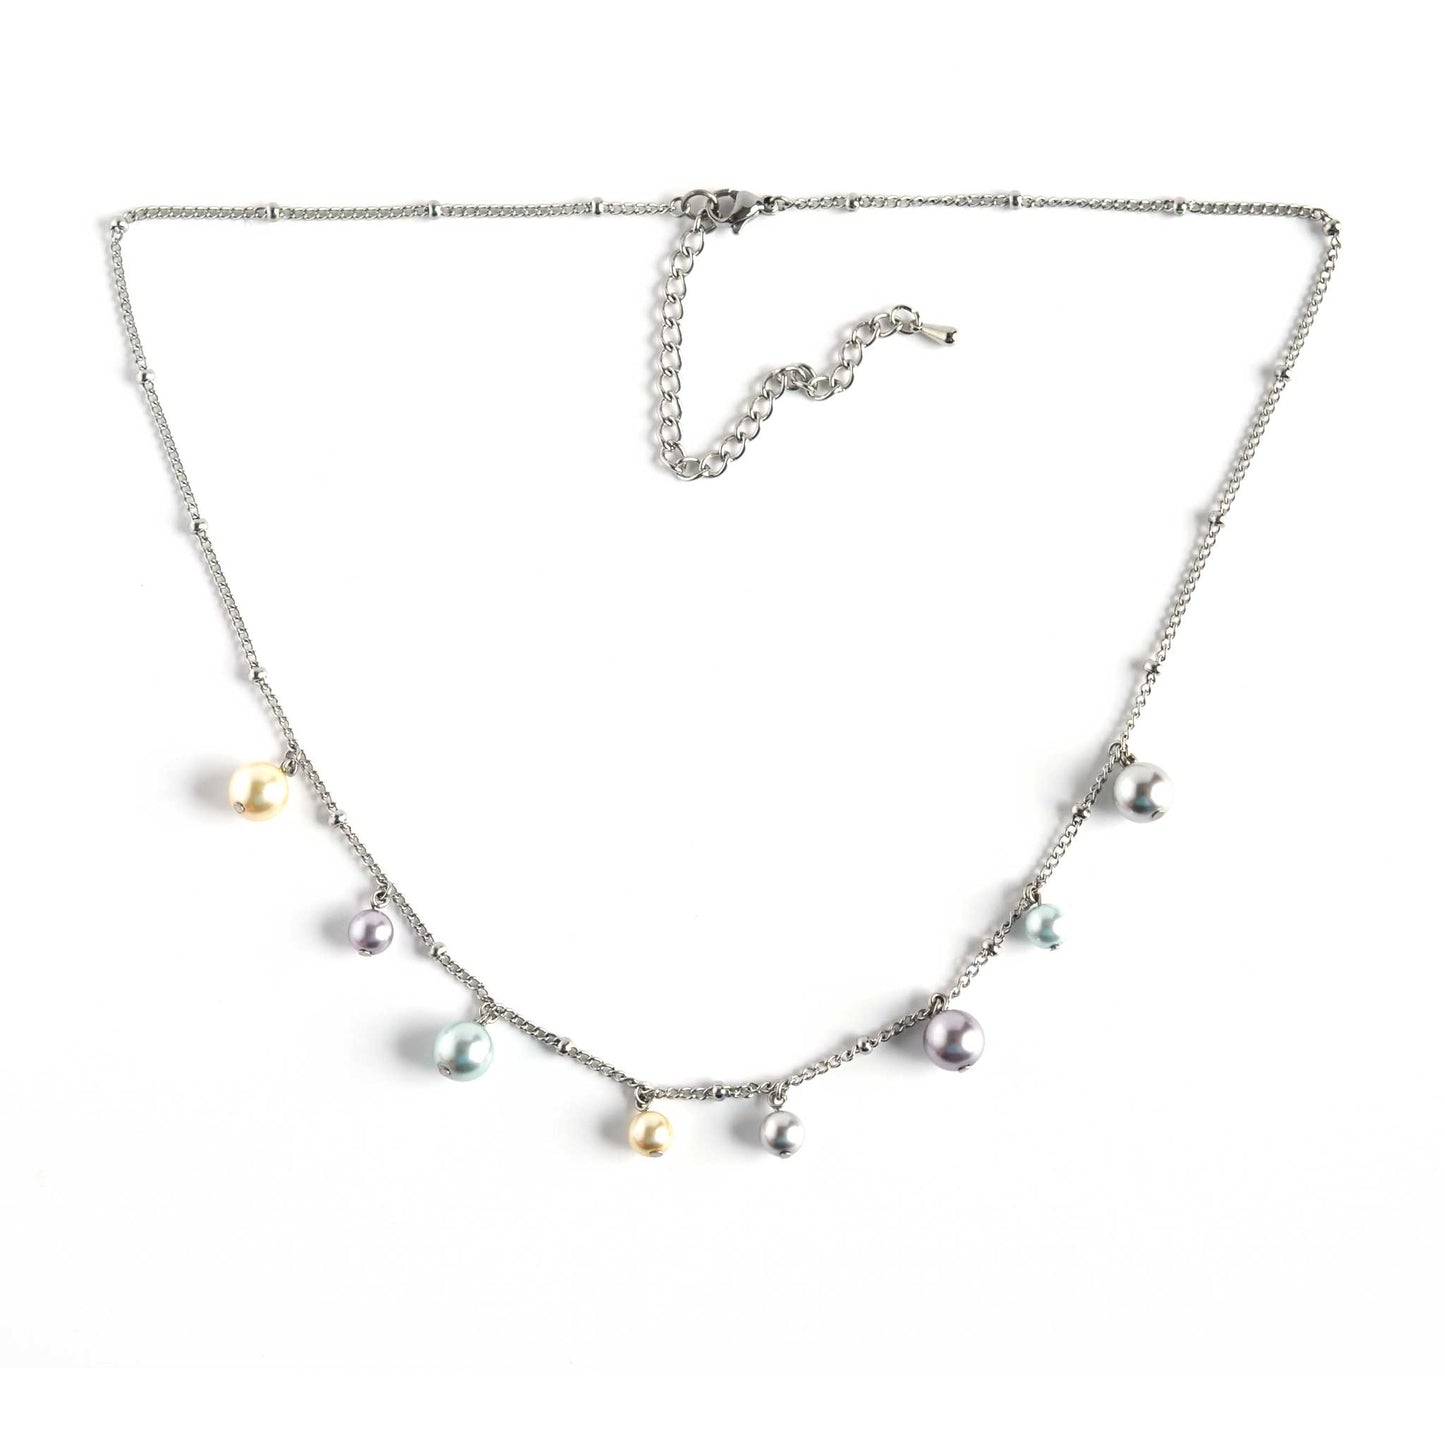 Faux pearl charms necklace with extender chain on white background.